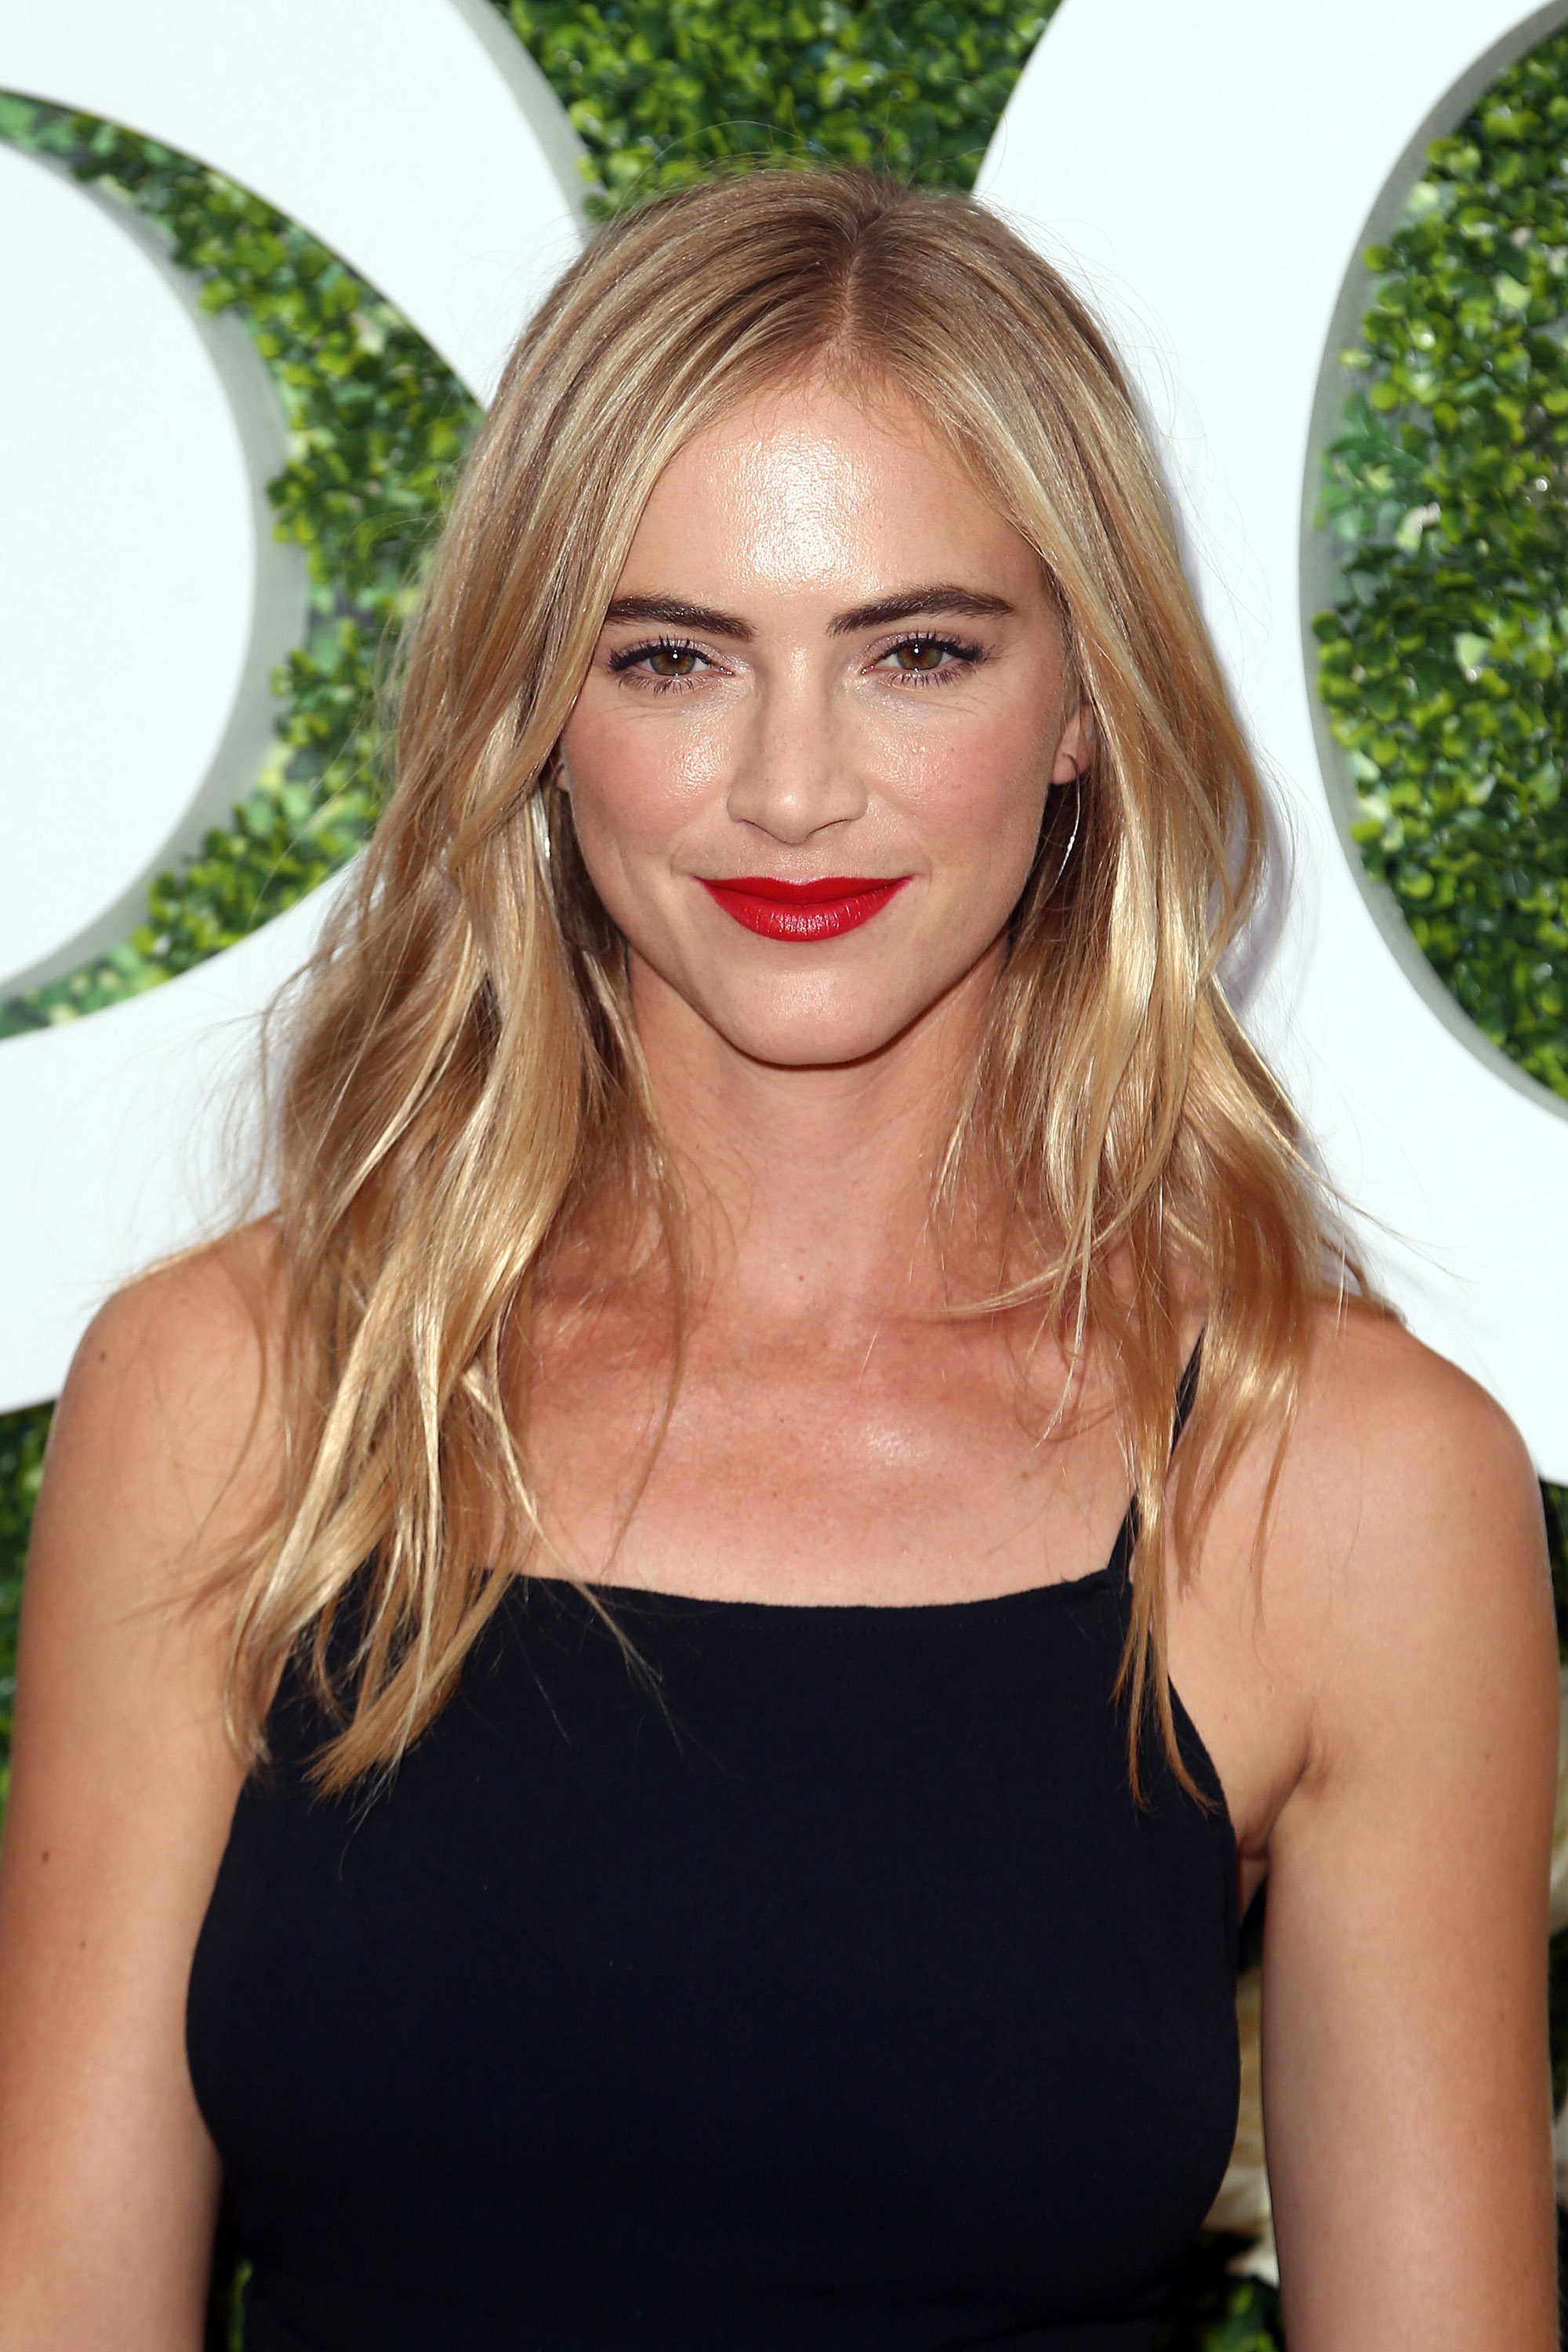 Emily Wickersham at the Summer TCA Tour event in Studio City, California on August 1, 2017 | Source: Getty Images